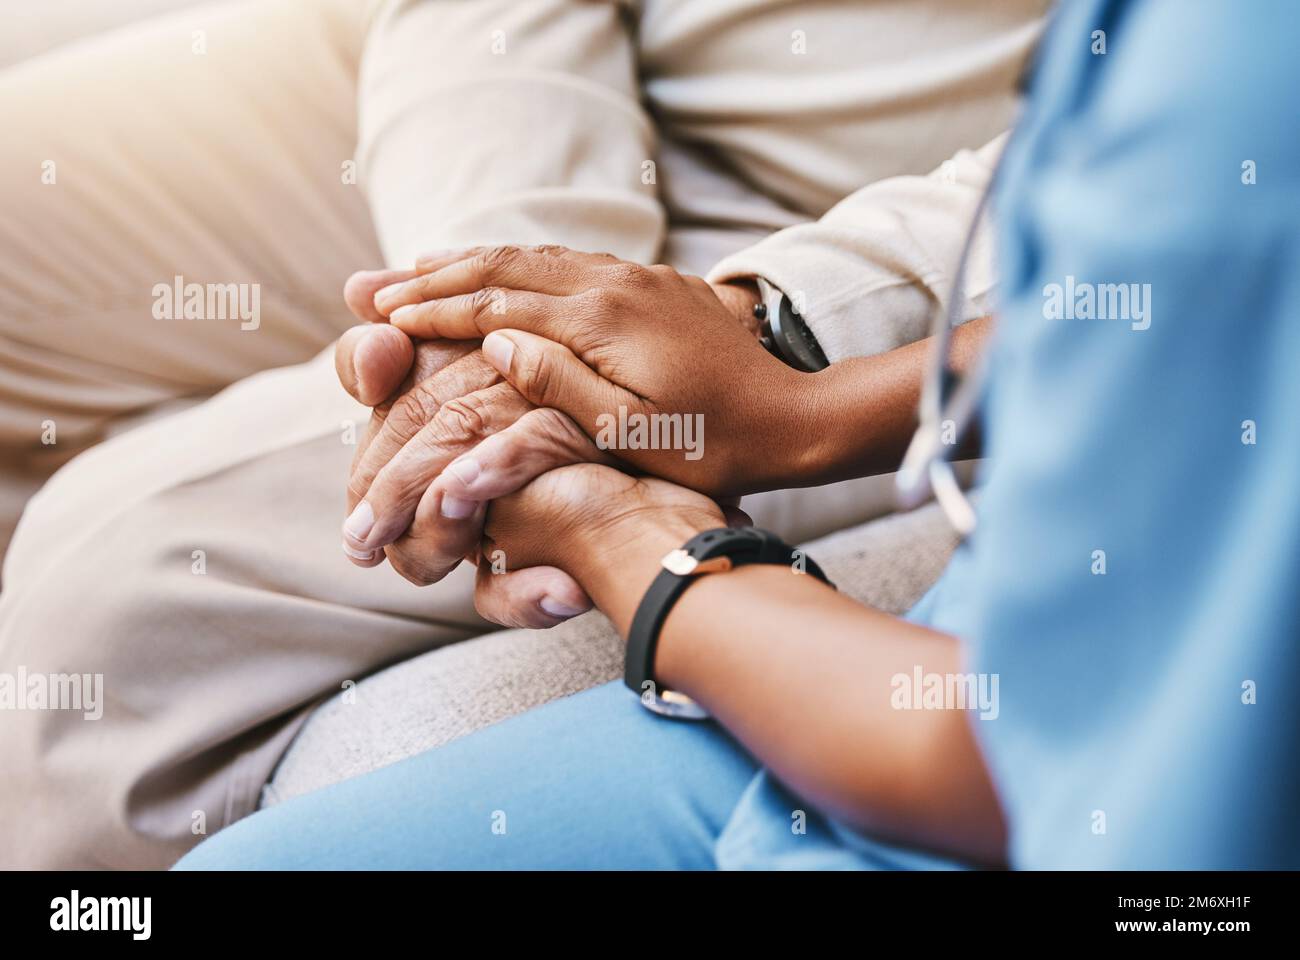 Nurse holding hands with patient in empathy, trust and support of help, advice and healthcare consulting. Kindness, counseling and medical therapy Stock Photo